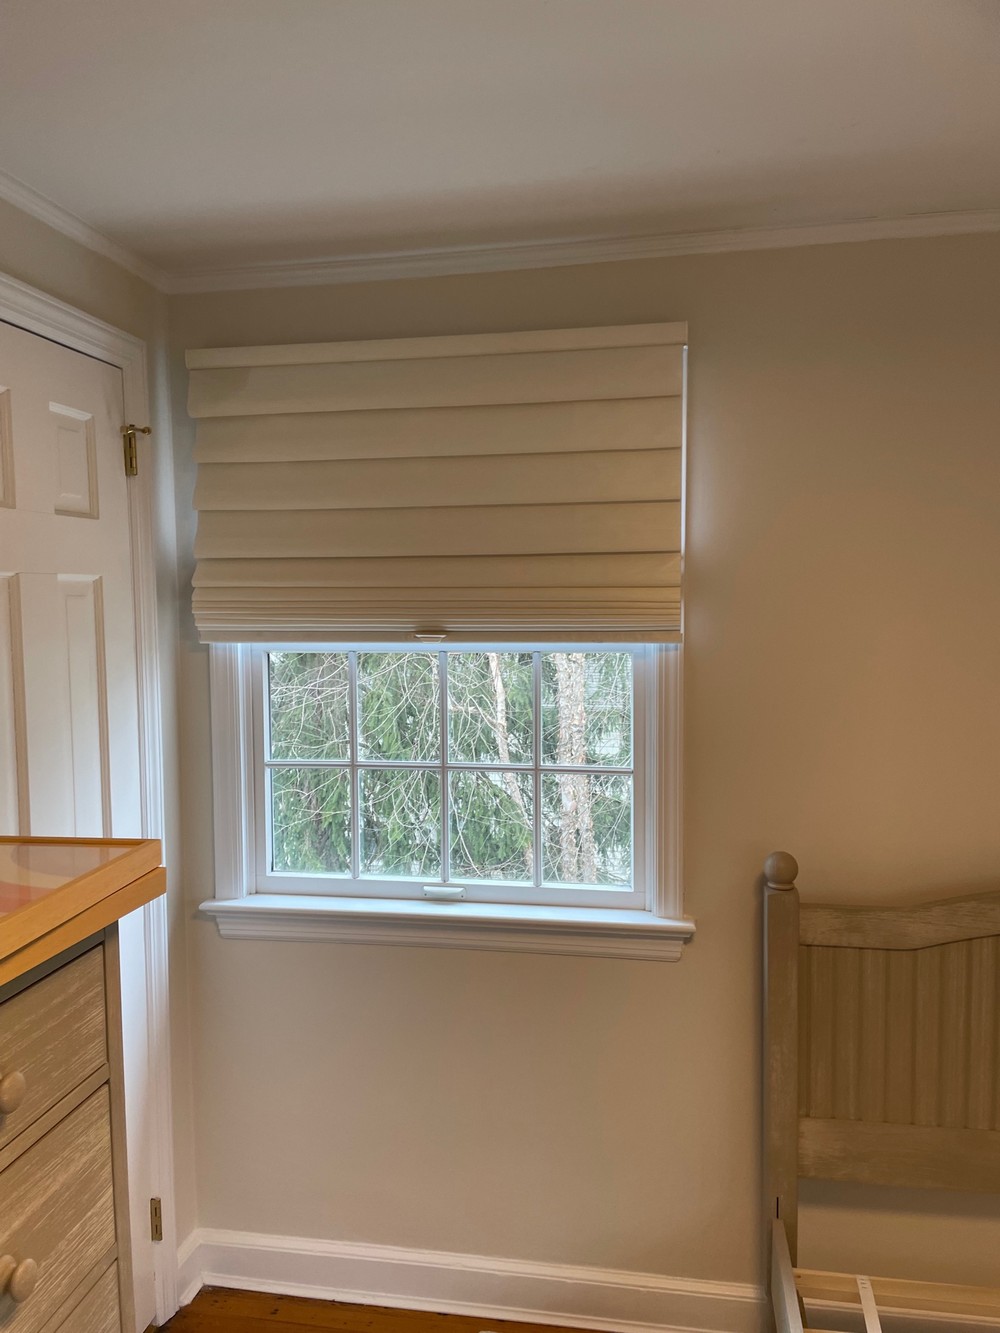 Hunter Douglas Cordless, Soft-Fold Vignettes with Blackout Linings in Ramsey, NJ